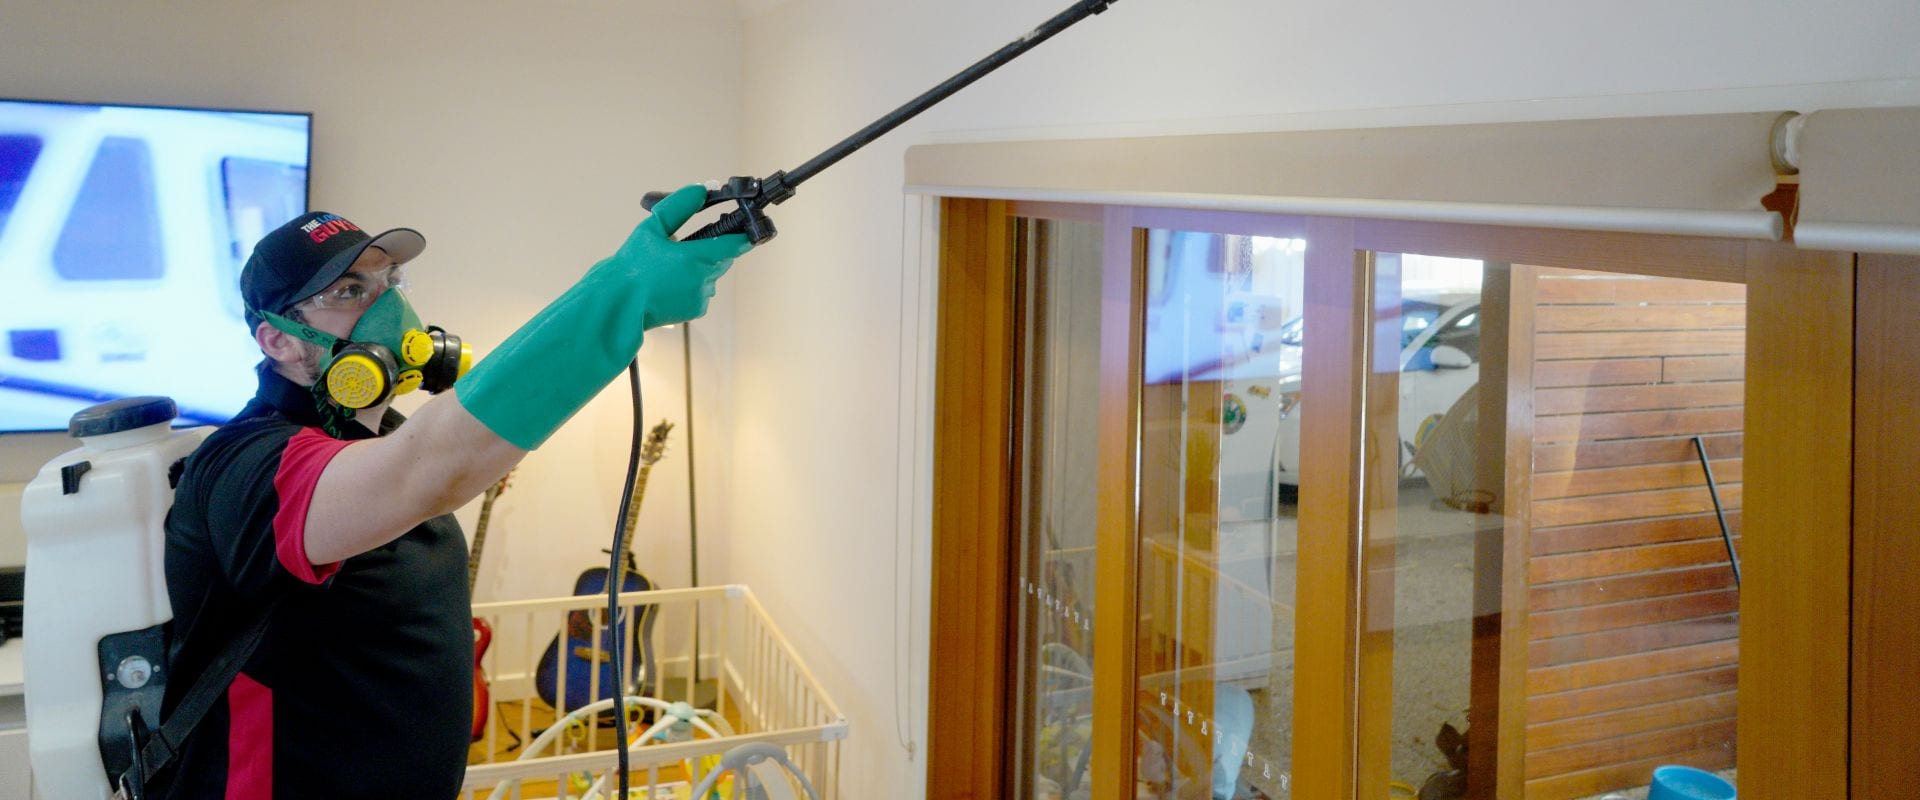 Pest Control Services in Adelaide